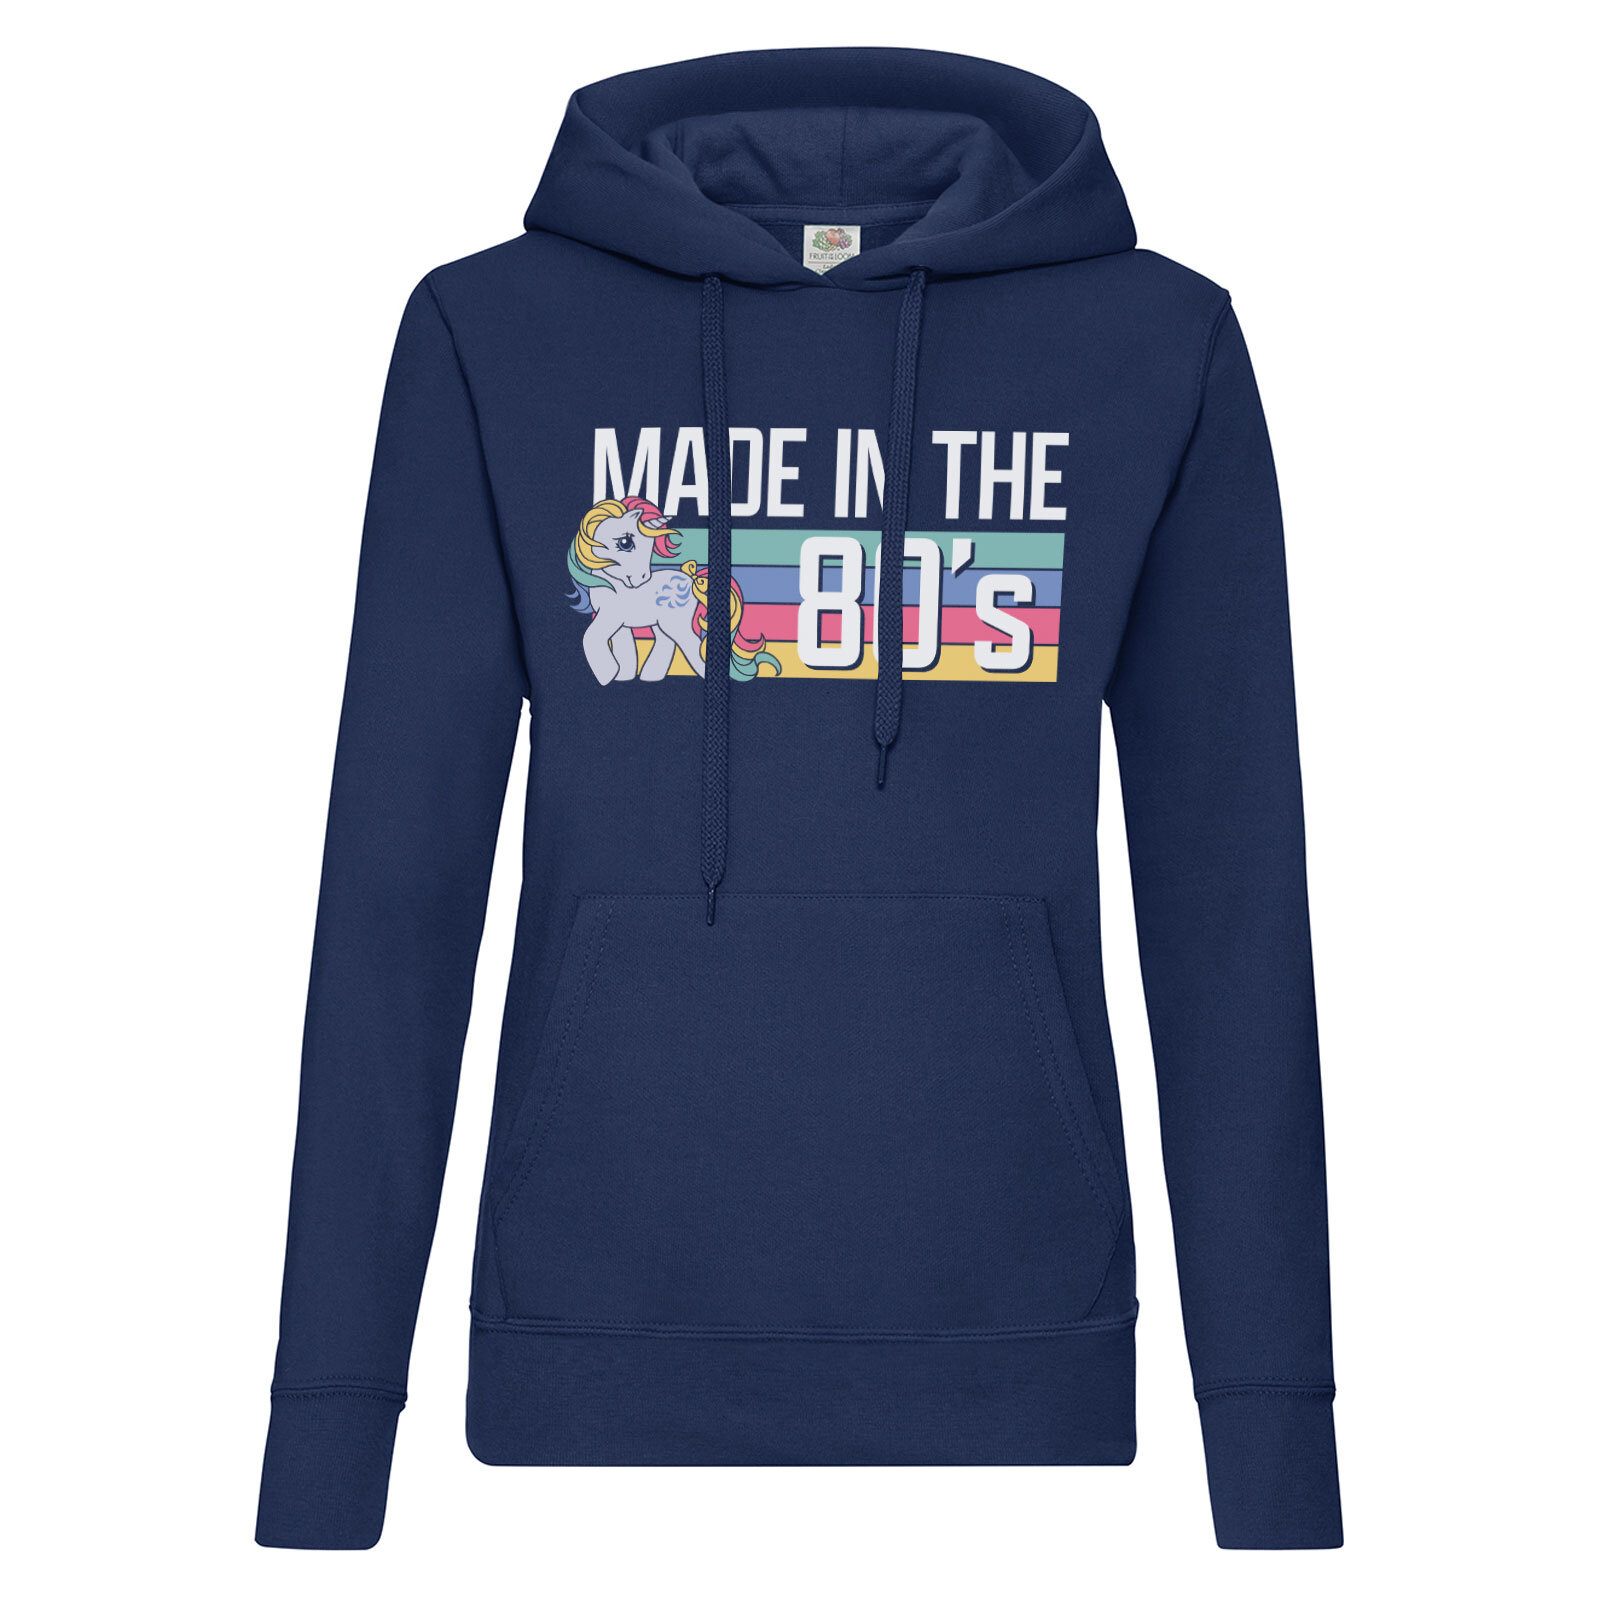 My Little Pony - Made In The 80's Girls Hoodie